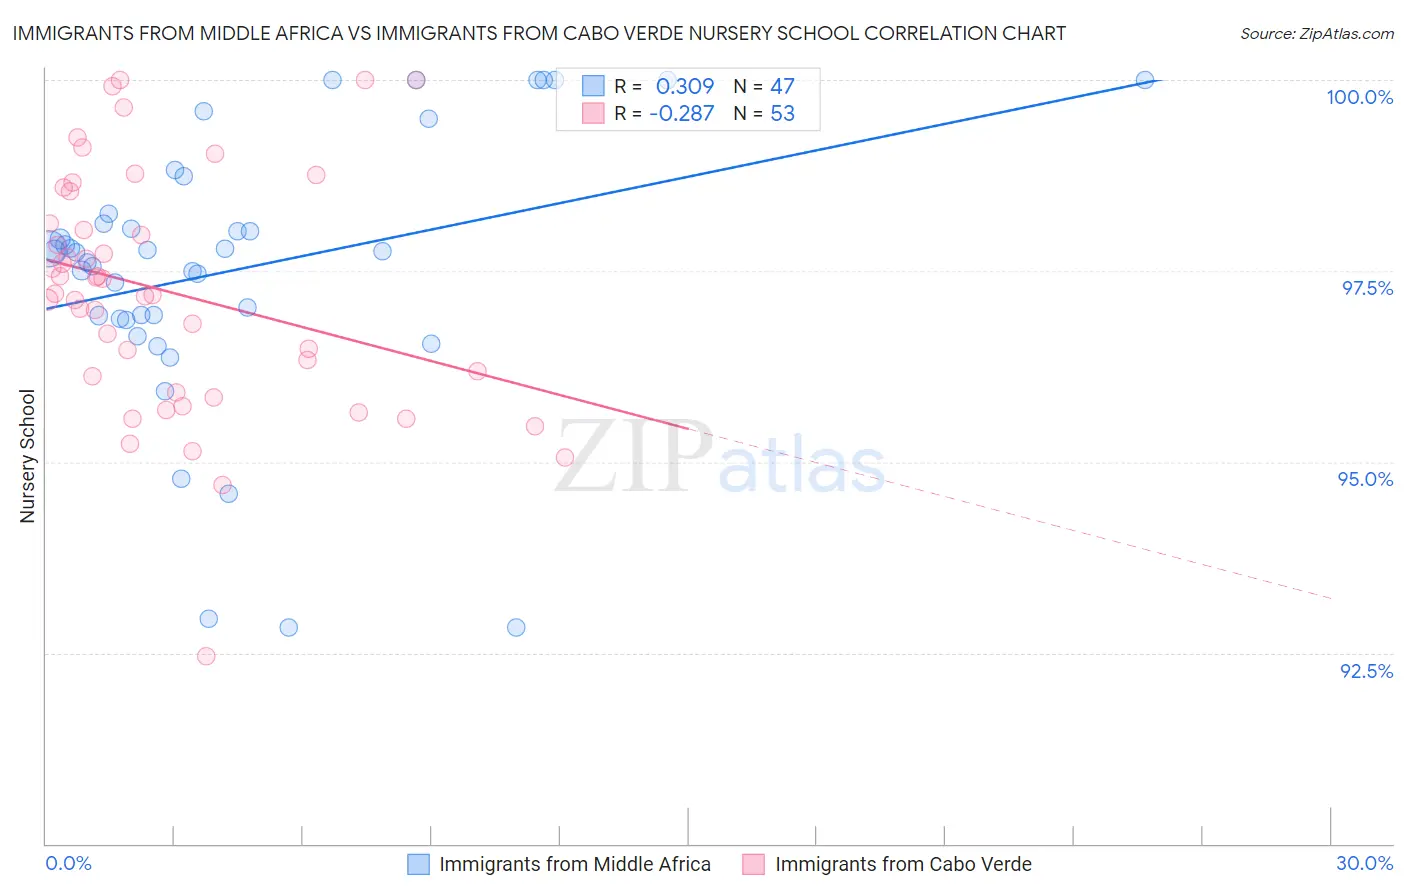 Immigrants from Middle Africa vs Immigrants from Cabo Verde Nursery School